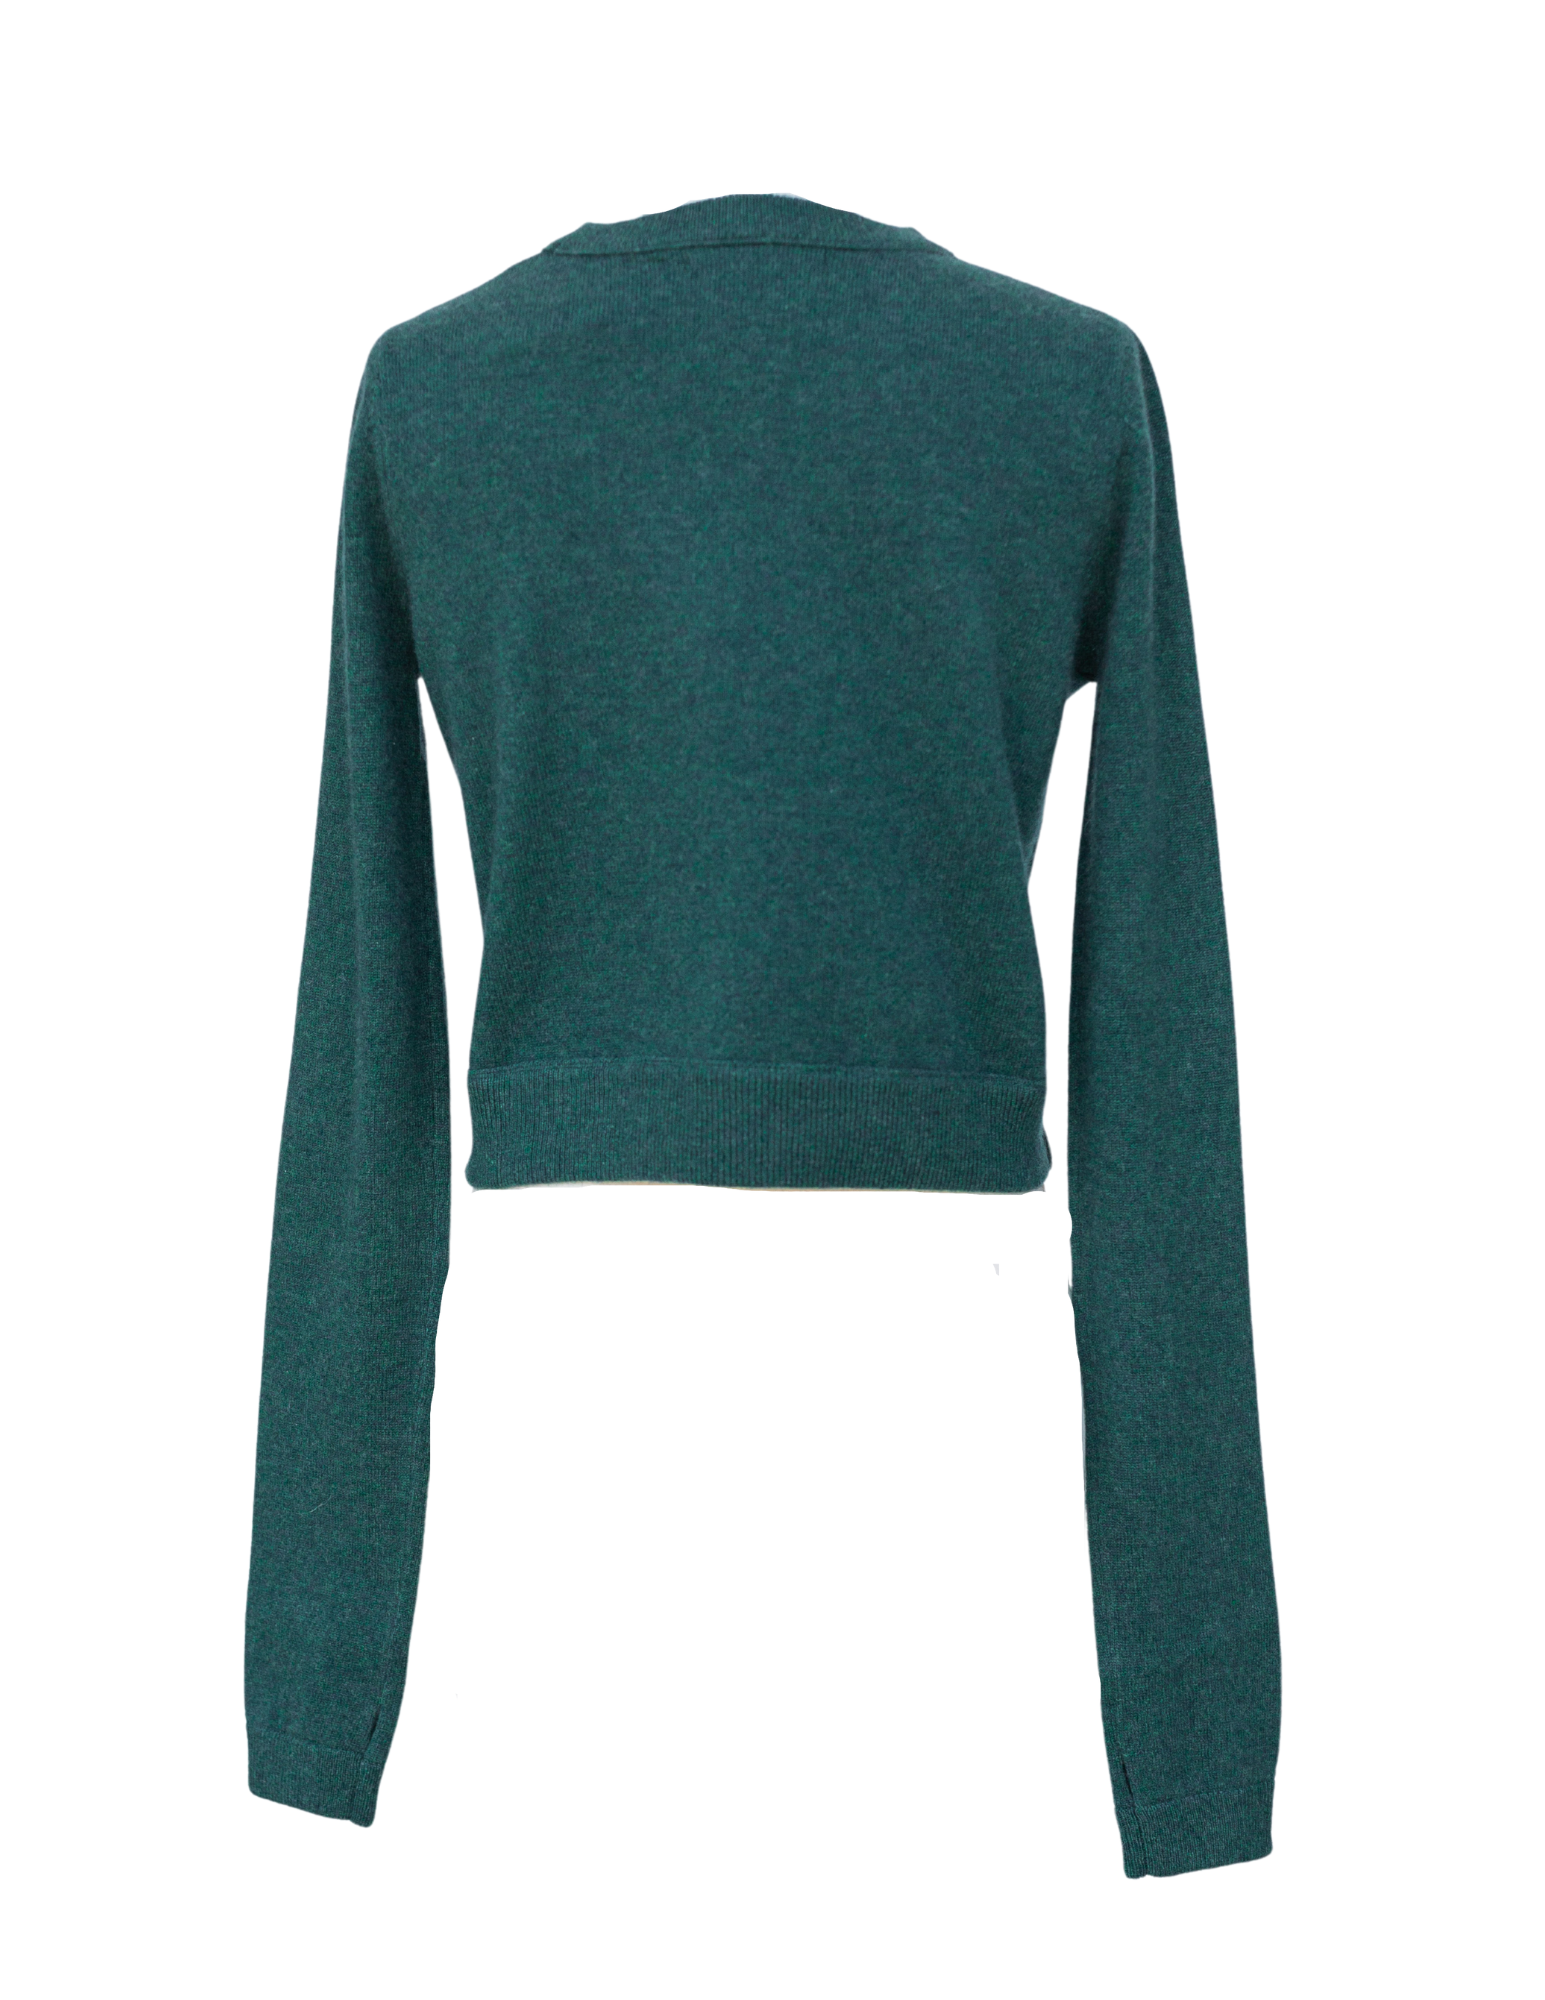 All Thumbs Sweater - Emerald